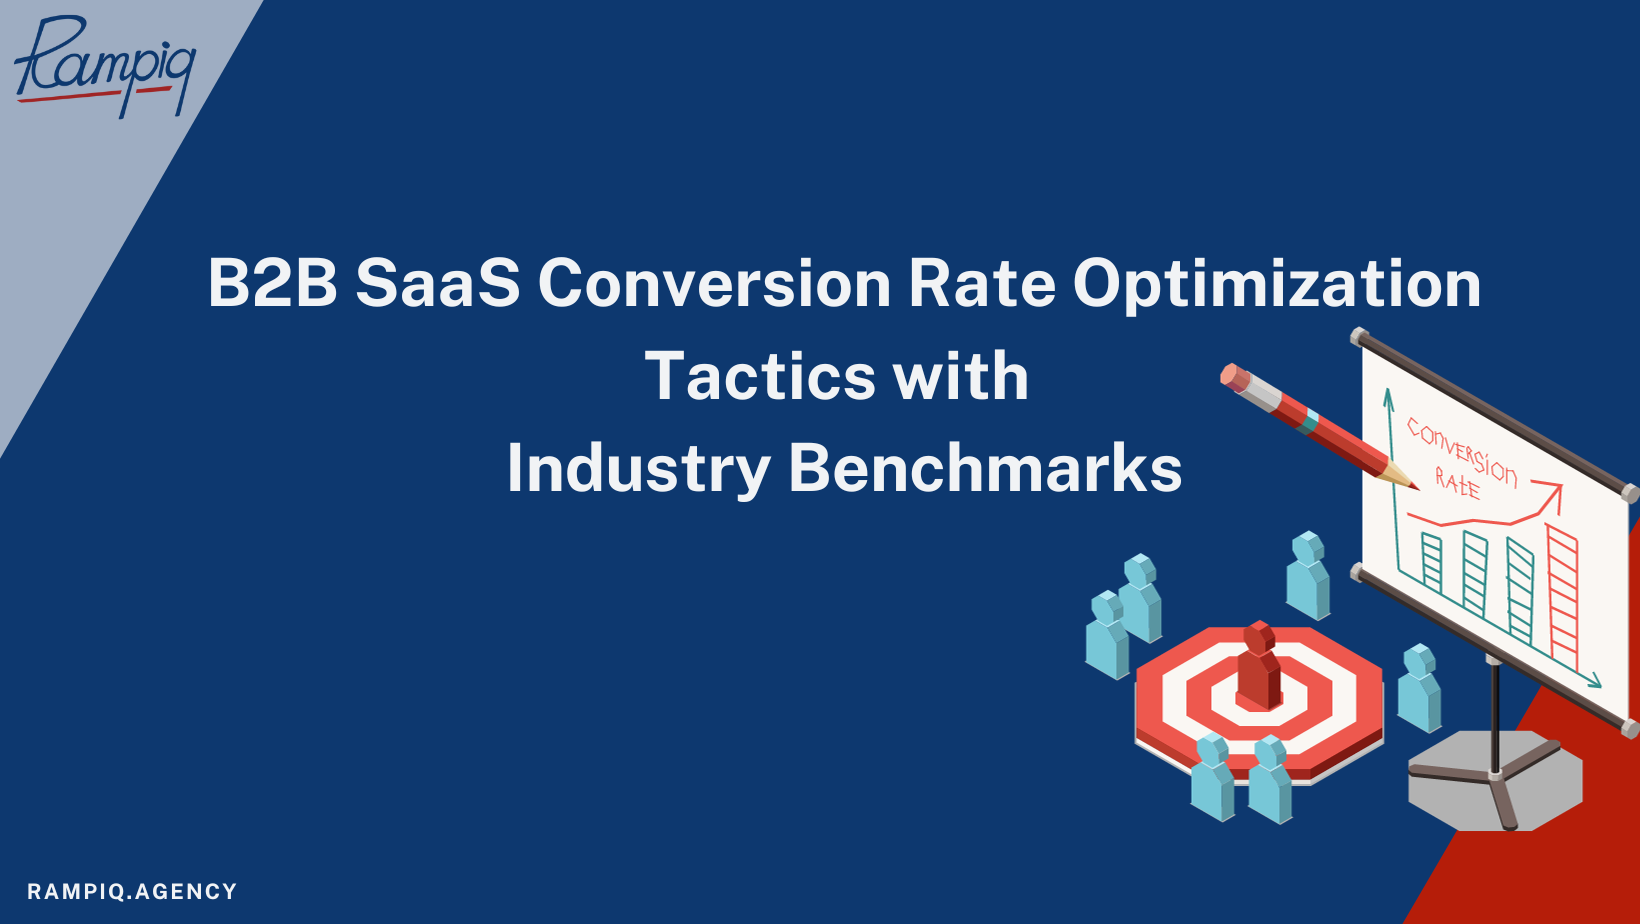 startup marketing agency B2B SaaS Conversion Rate Optimization Tactics with Industry Benchmarks